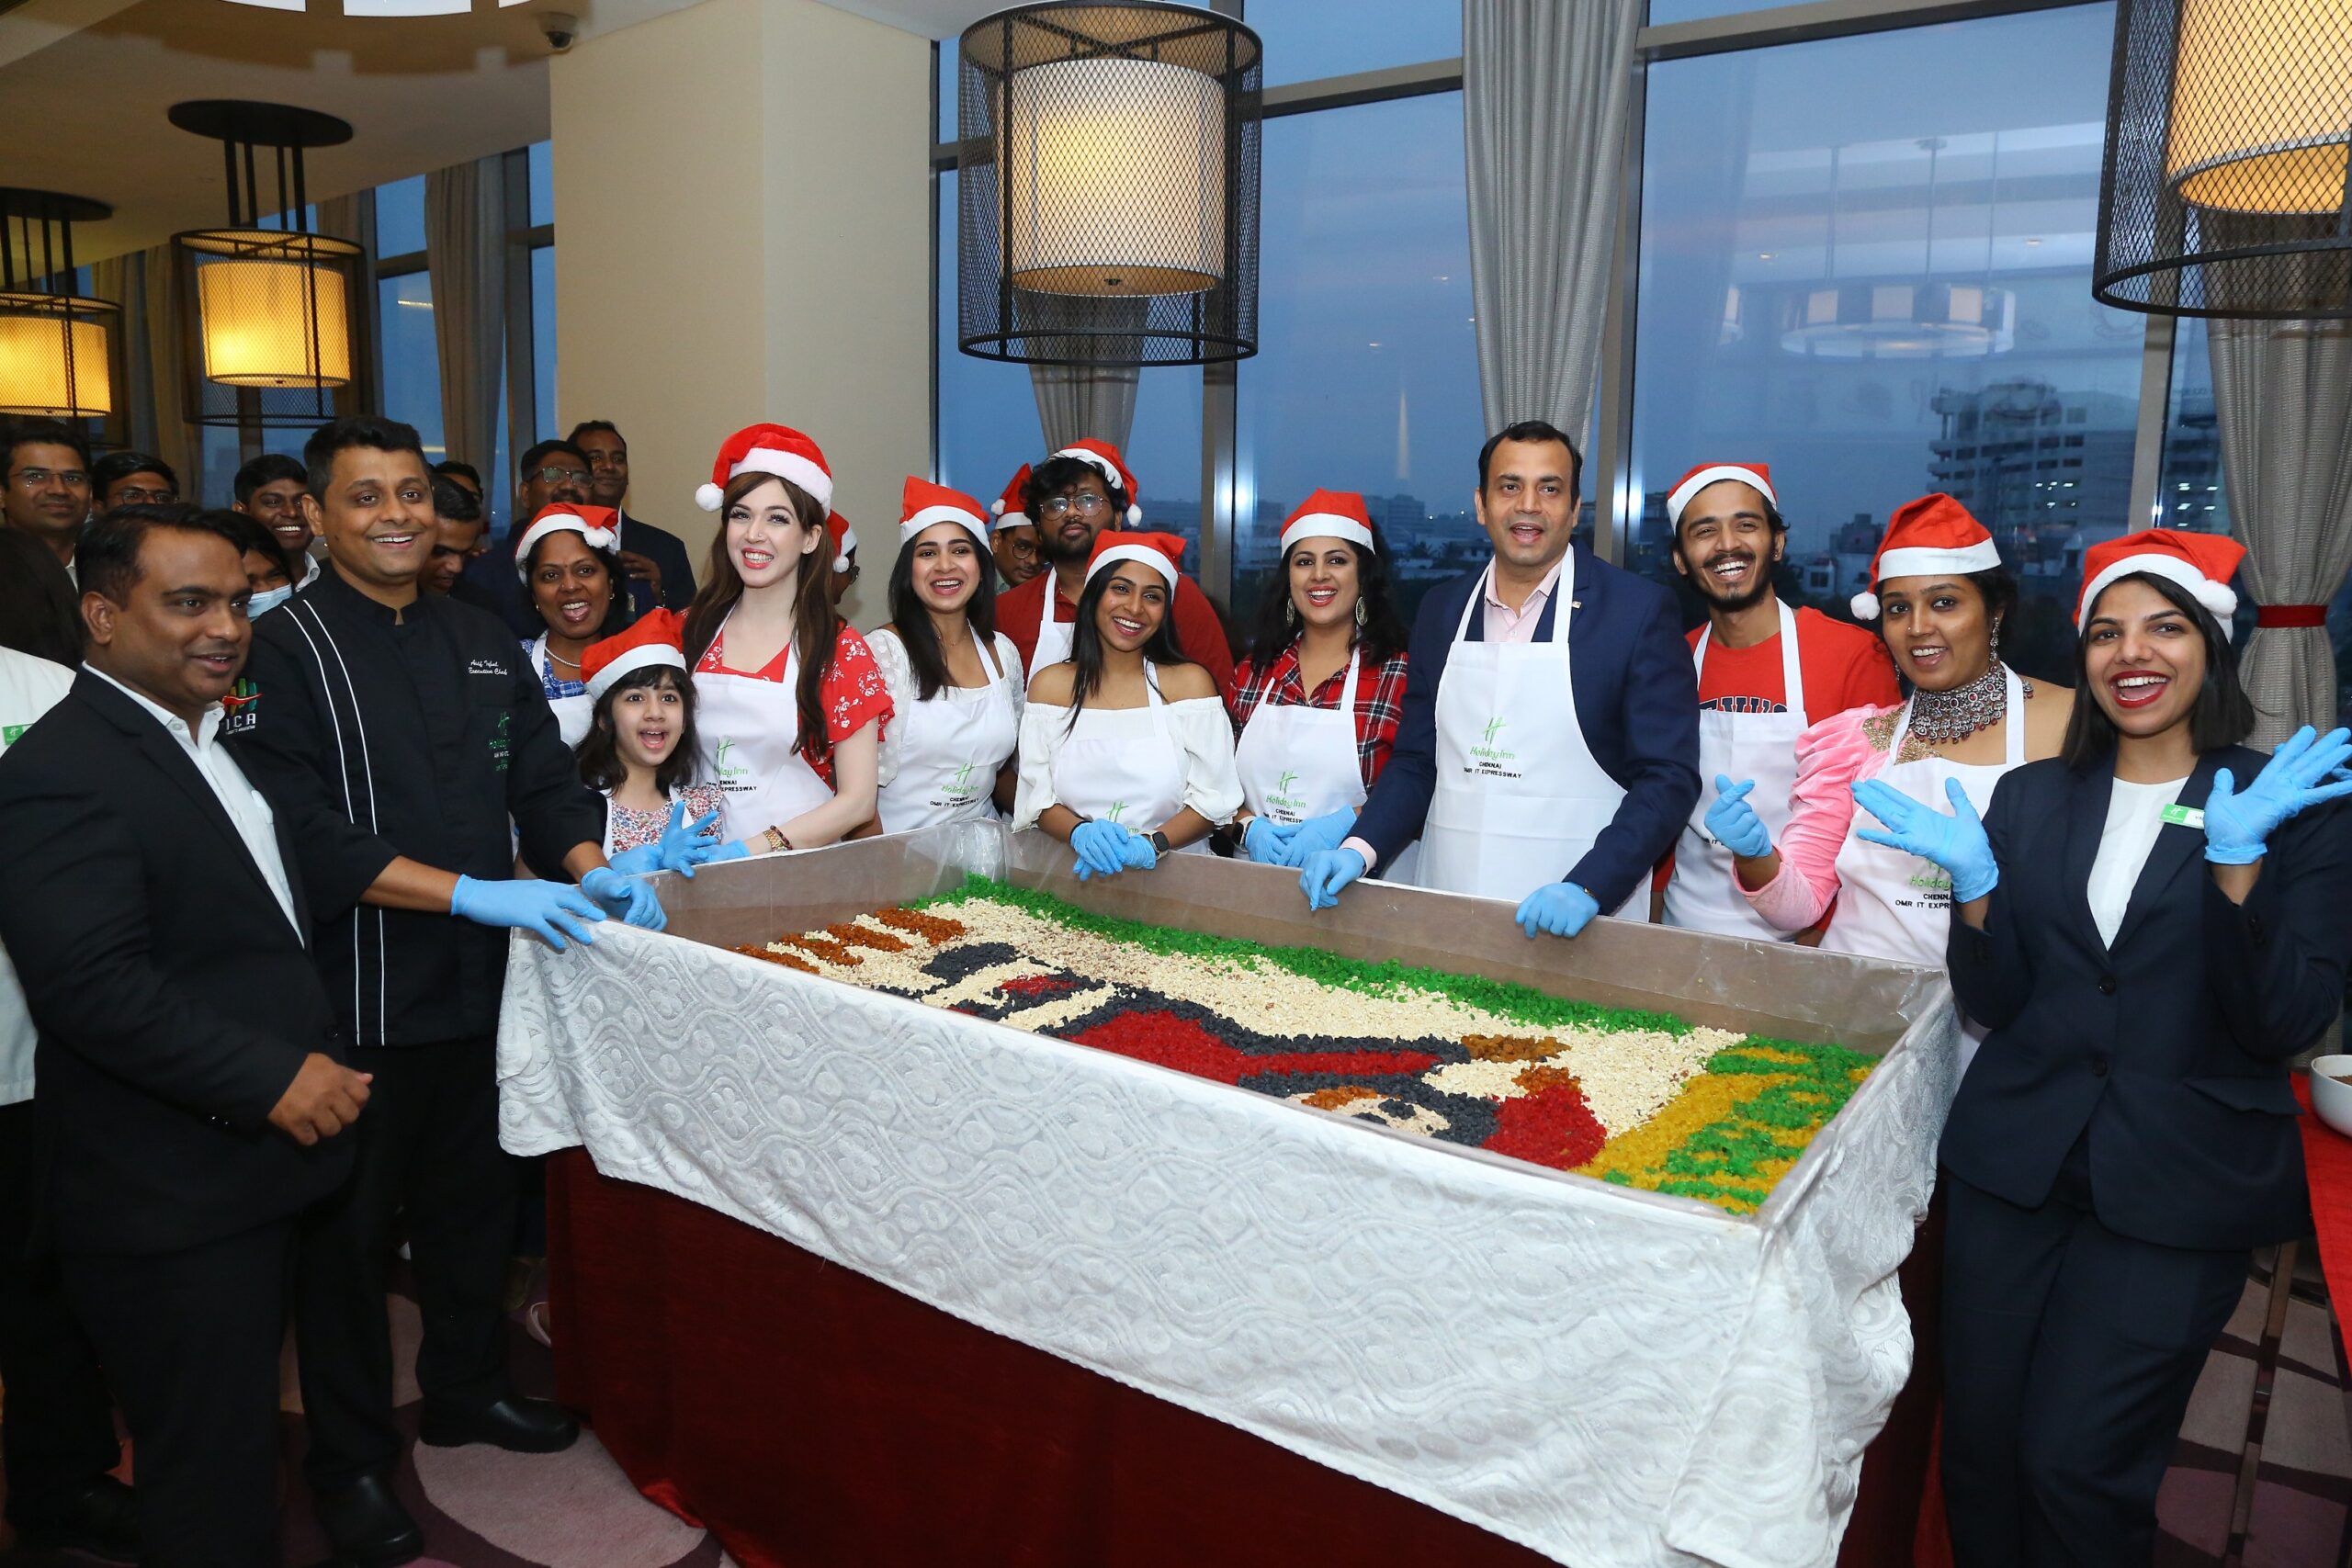 Holiday Inn Chennai IT OMR Expressway celebrates its Annual Cake Mixing Event